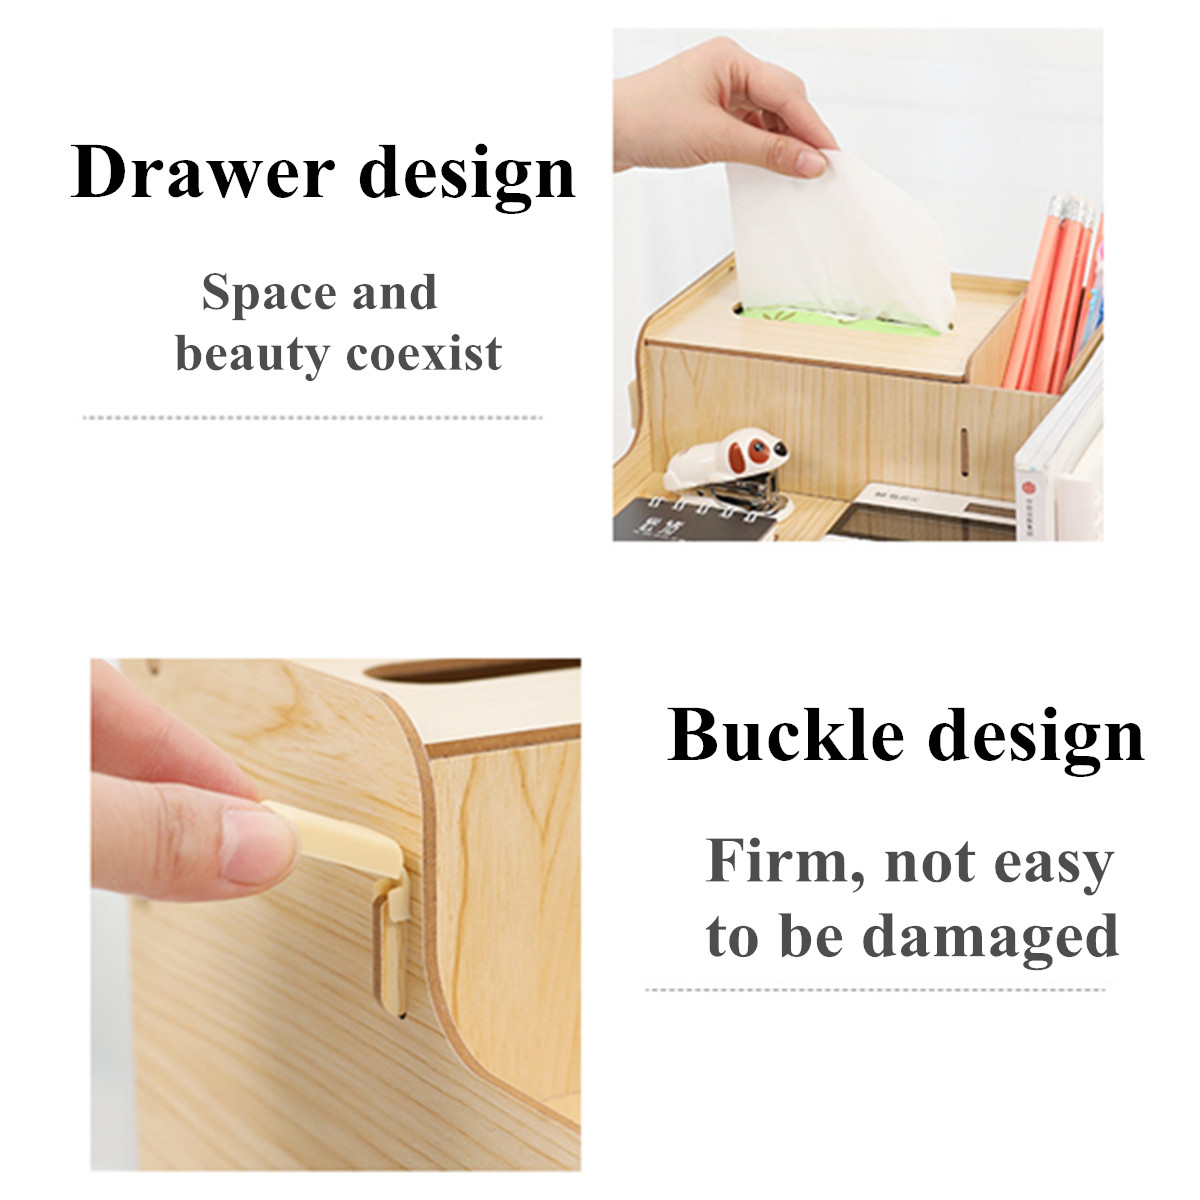 Stationery-Container-Desktop-Drawer-Organizer-Desktop-Storage-Box-Brush-Container-Office-Pencil-Hold-1603946-6